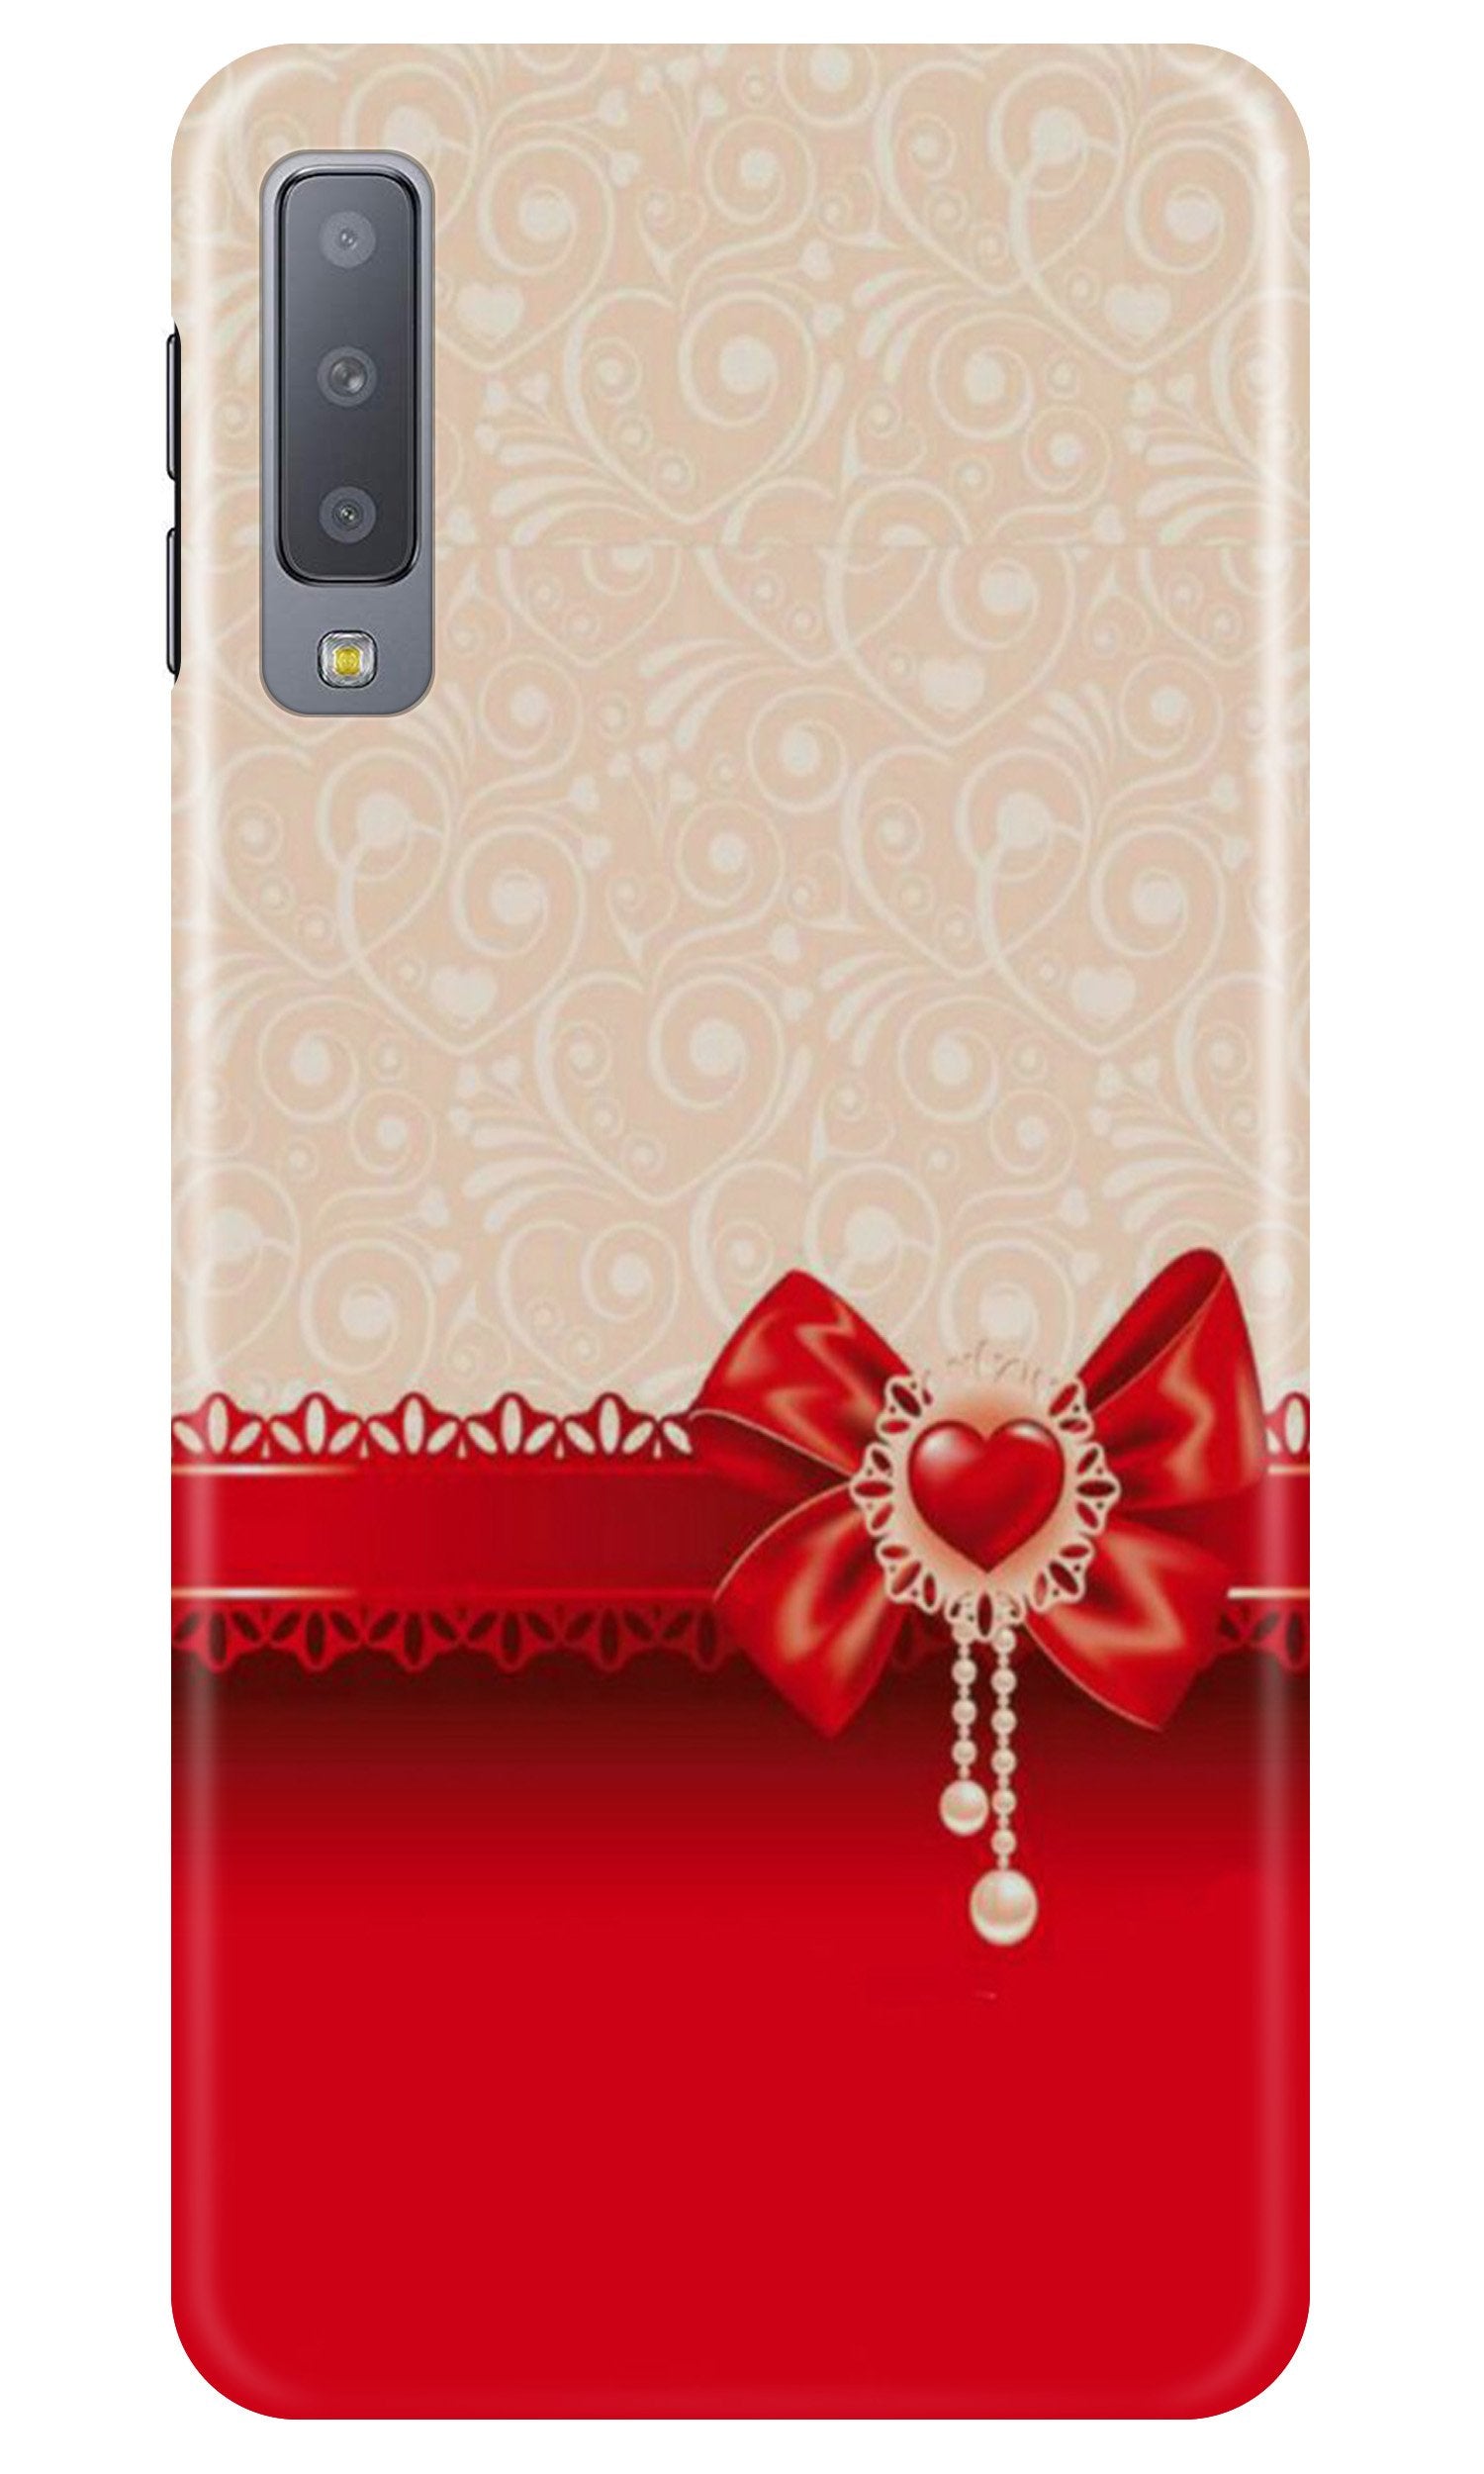 Gift Wrap3 Case for Samung Galaxy A70s